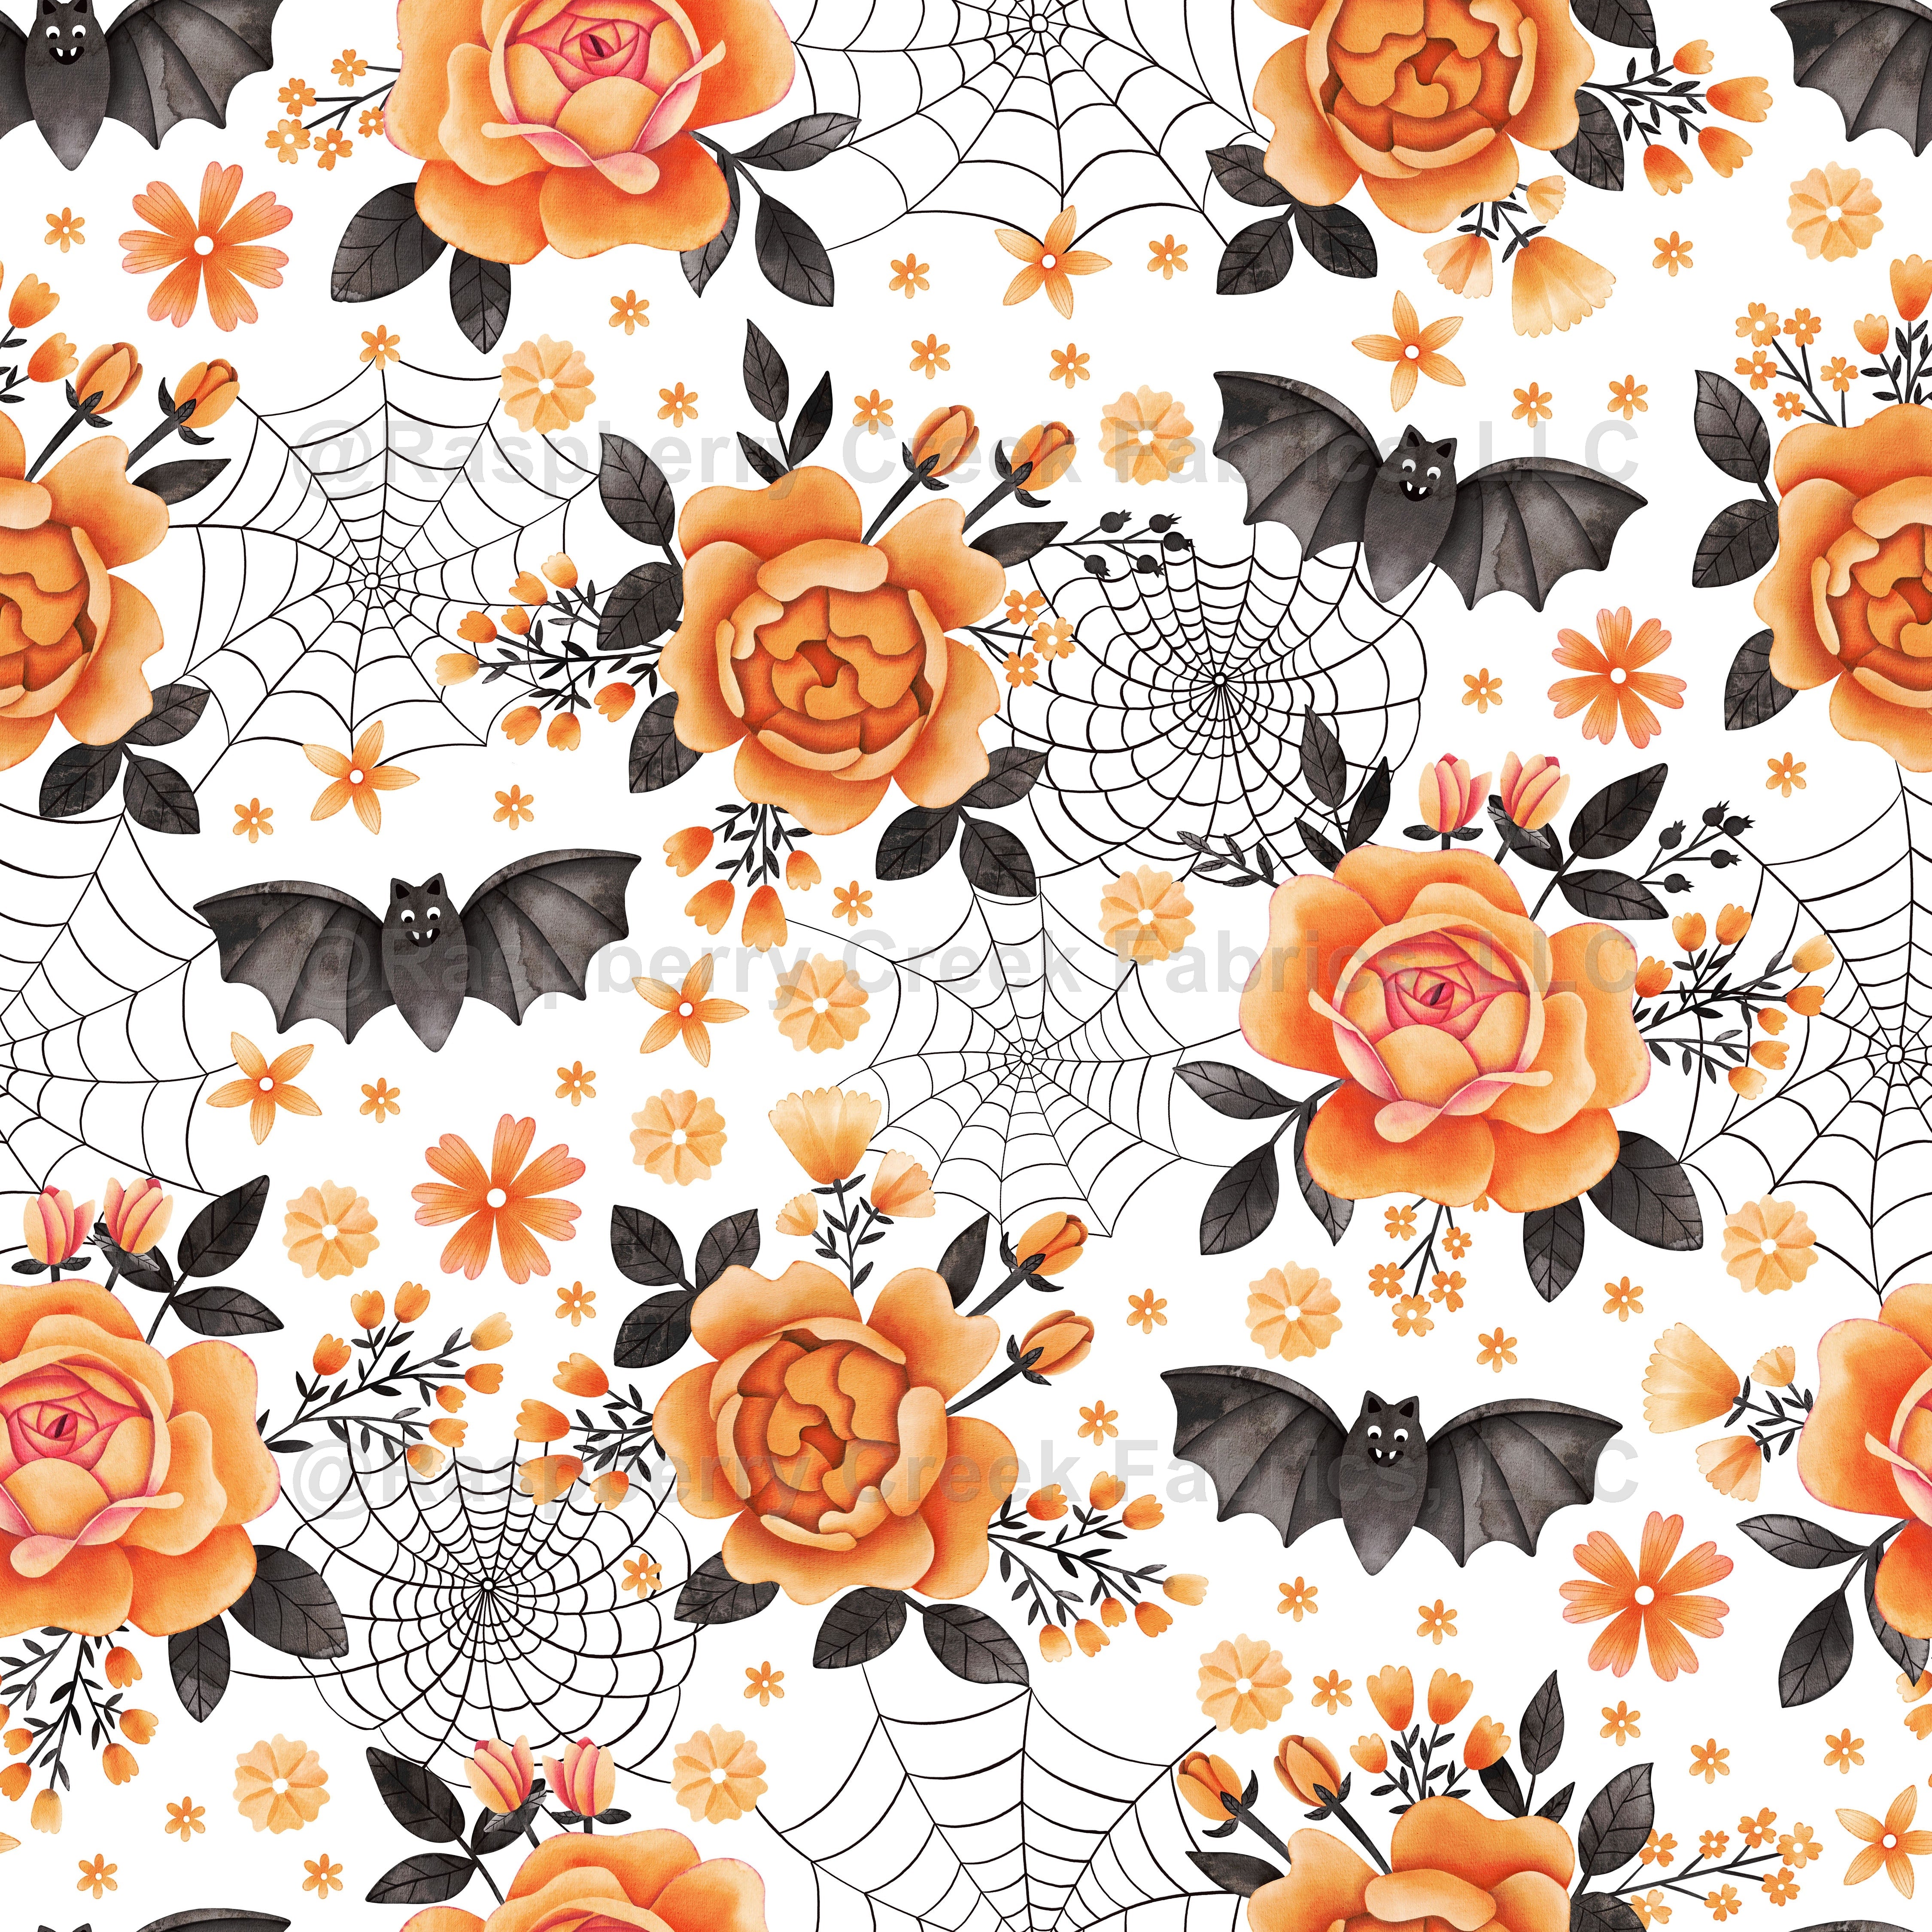 Bats, Spiderwebs, and Orange Peony Roses on White (Pastel Halloween Collection) Fabric, Raspberry Creek Fabrics, watermarked